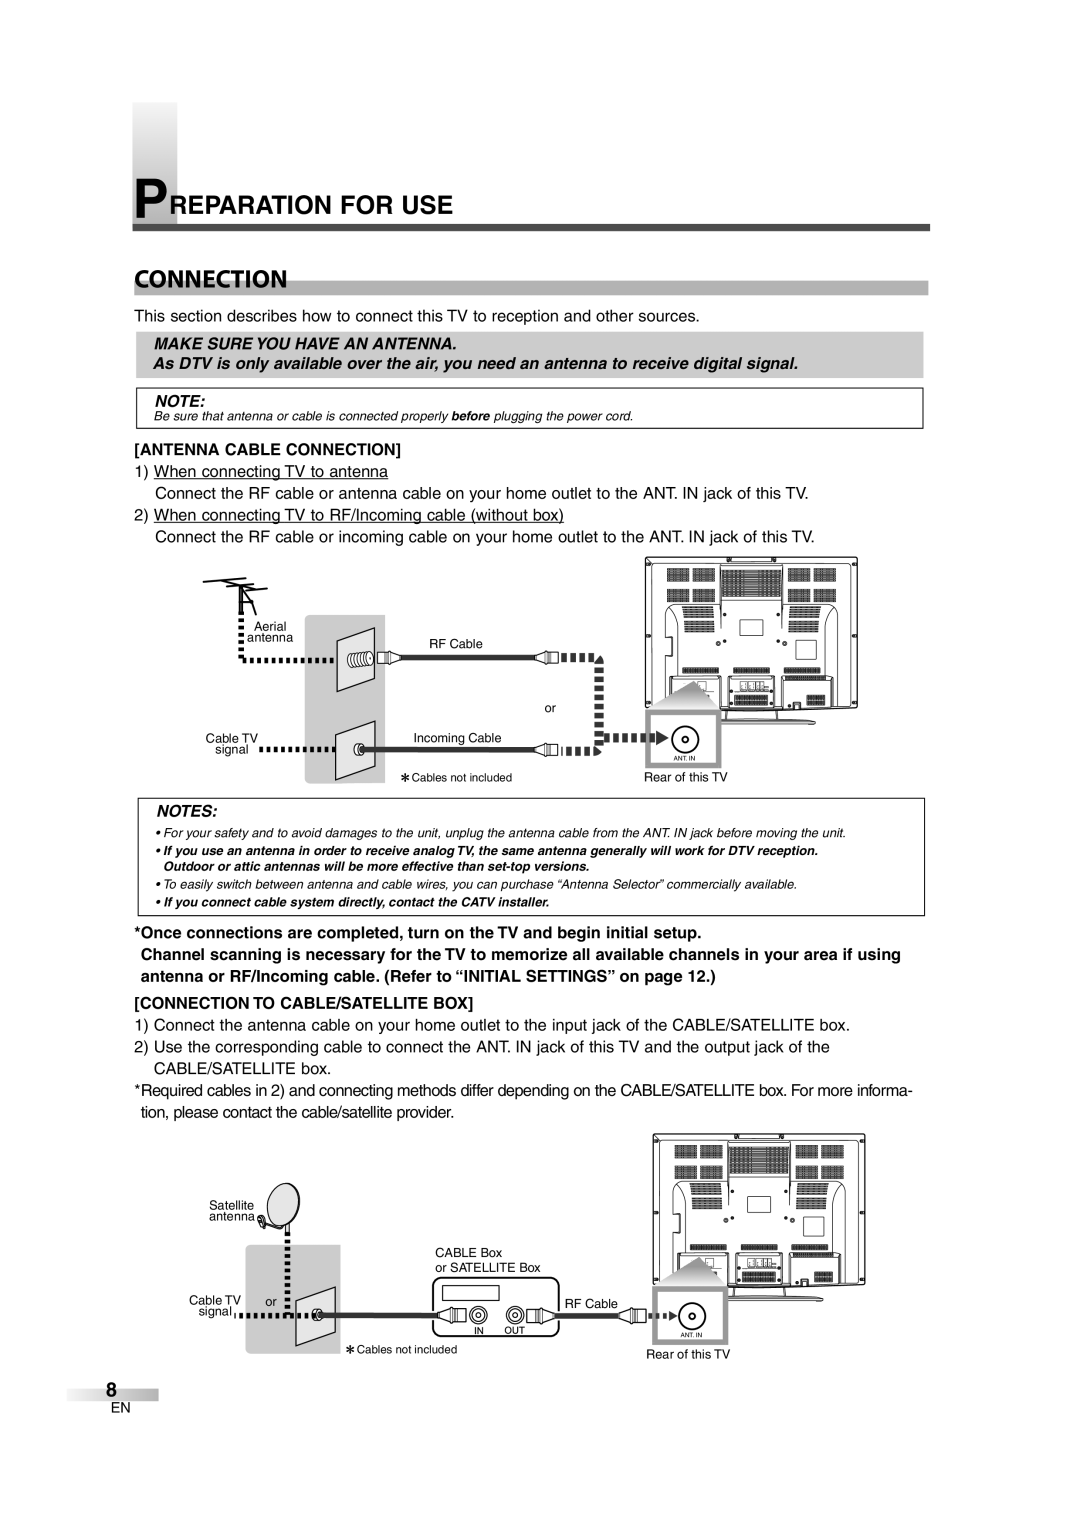 FUNAI CIWL3206 owner manual Preparation For Use, Make Sure You Have An Antenna, Antenna Cable Connection 